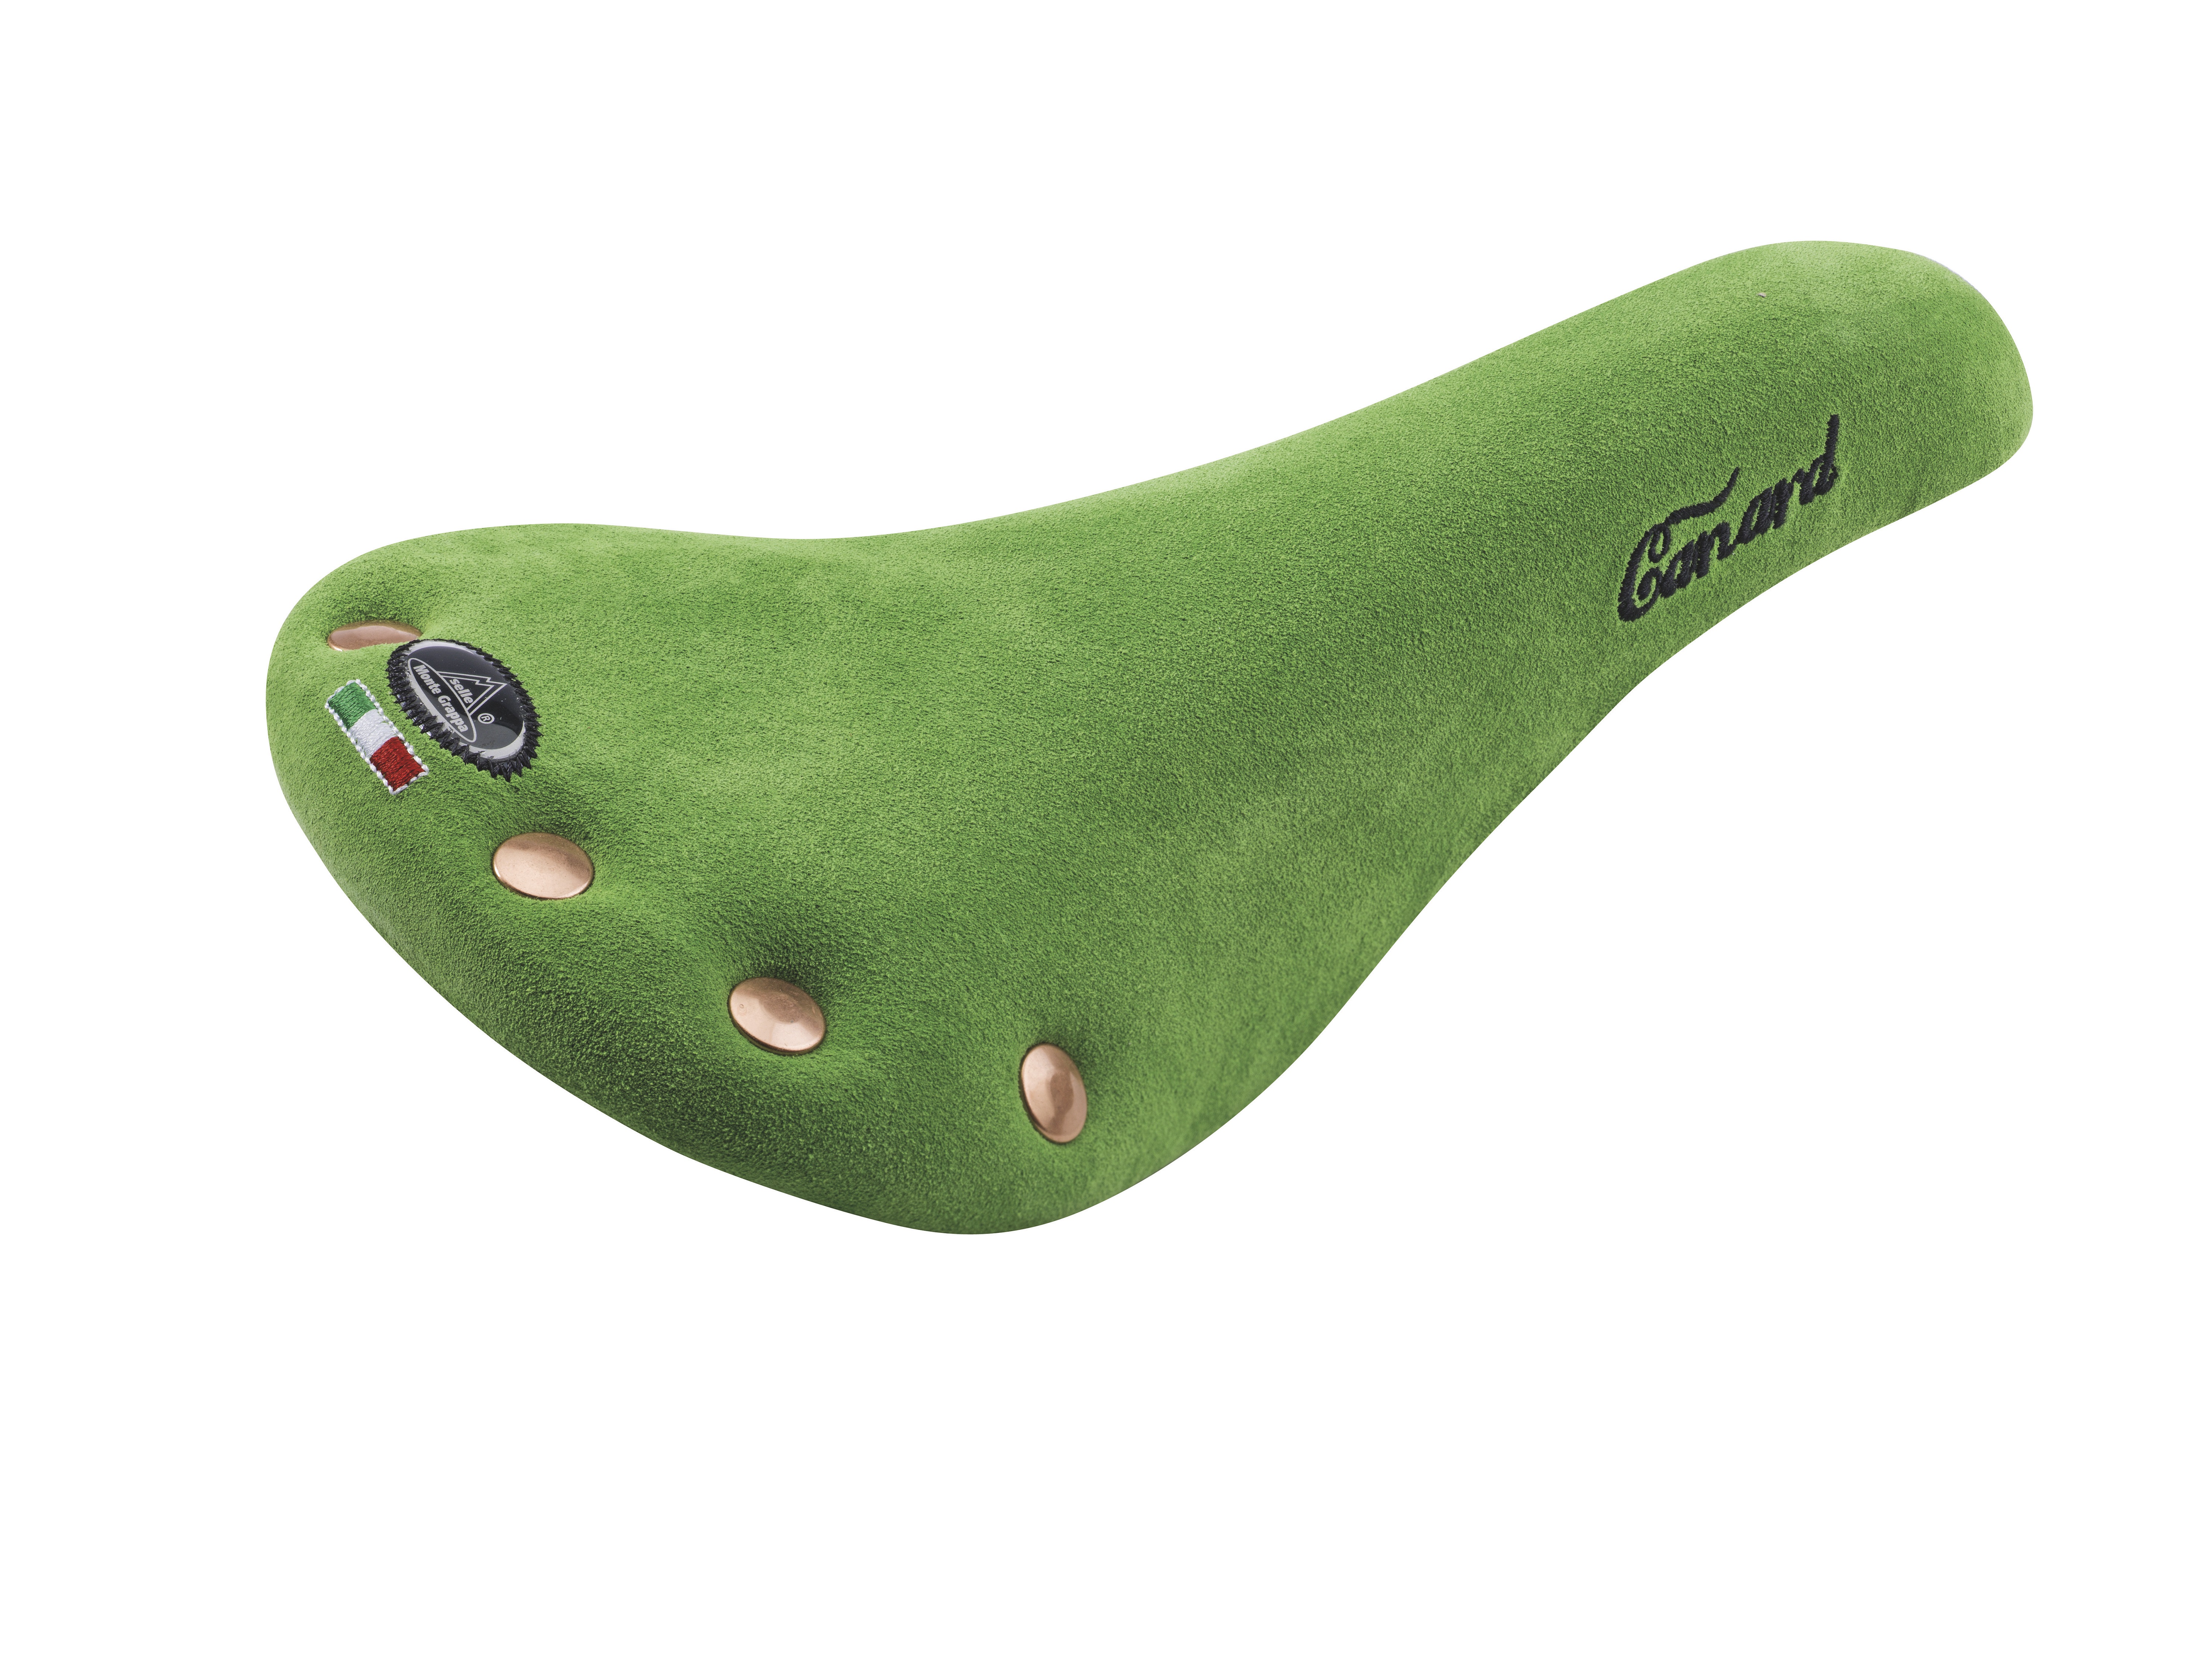 selle_singlespeed green monte grappa xc031 go by bike